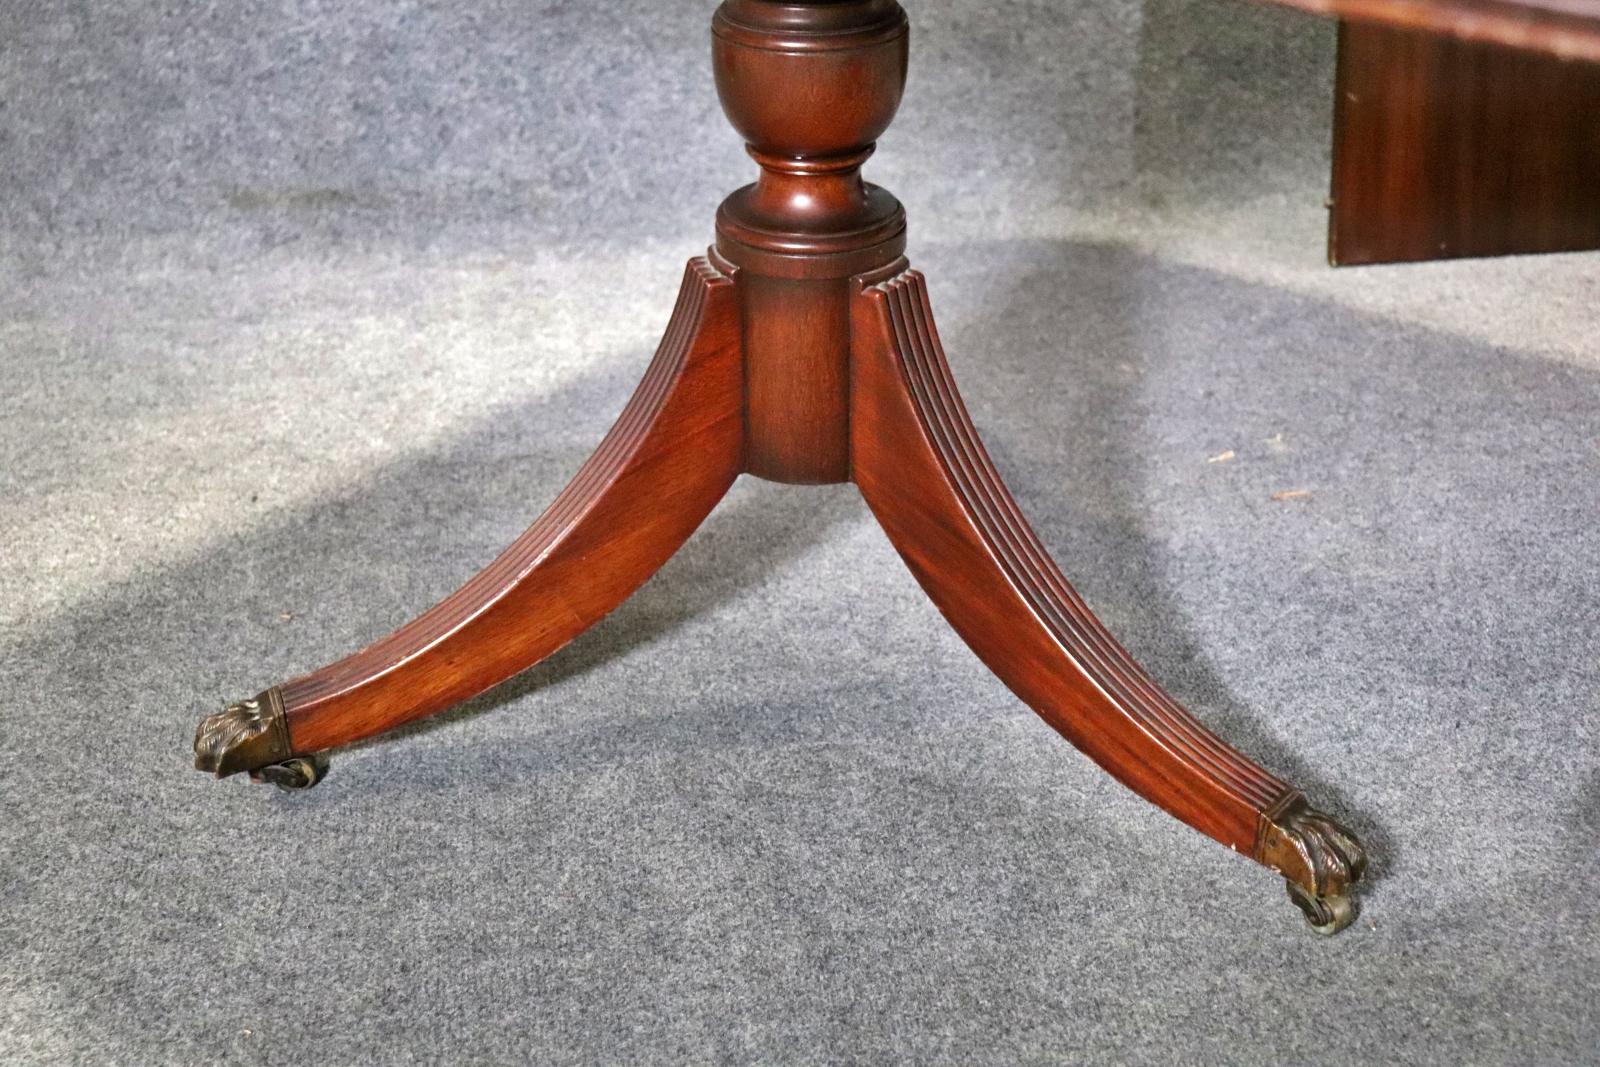 Plum Pudding Mahogany Banquet Dining Table with 2 leaves Manner Gillows In Good Condition For Sale In Swedesboro, NJ